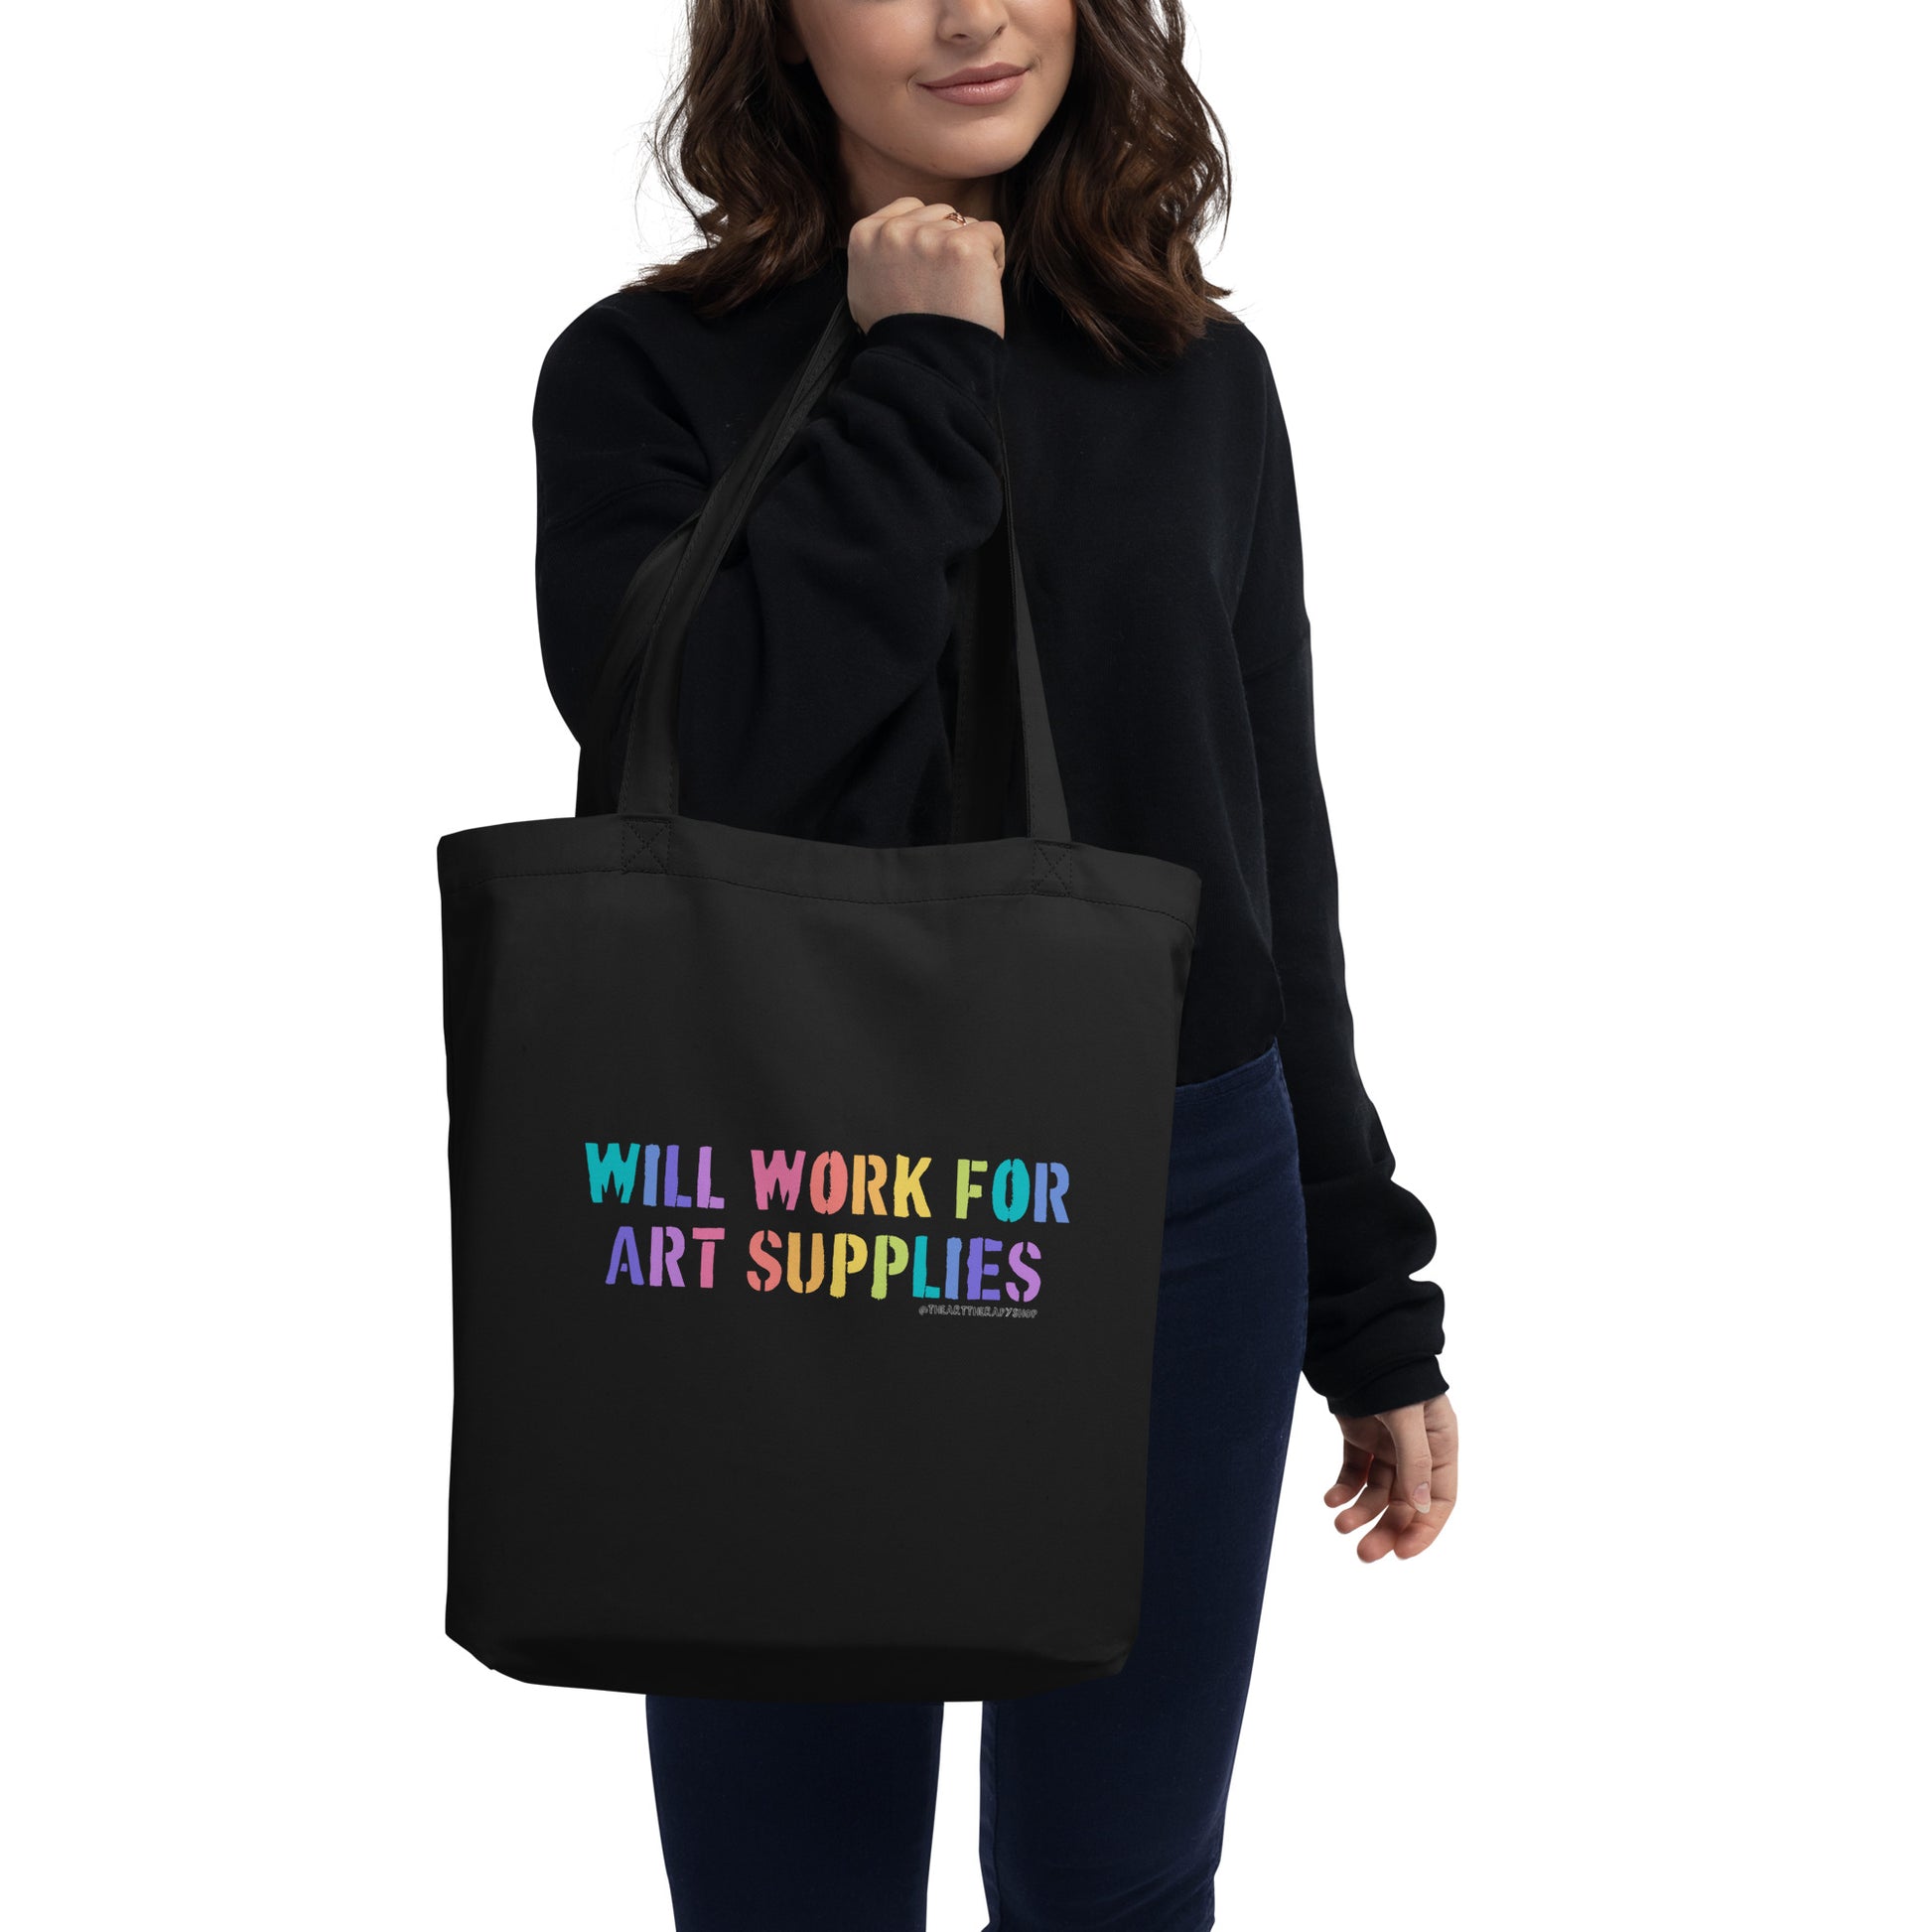 Will Work For Art Supplies Tote Bag